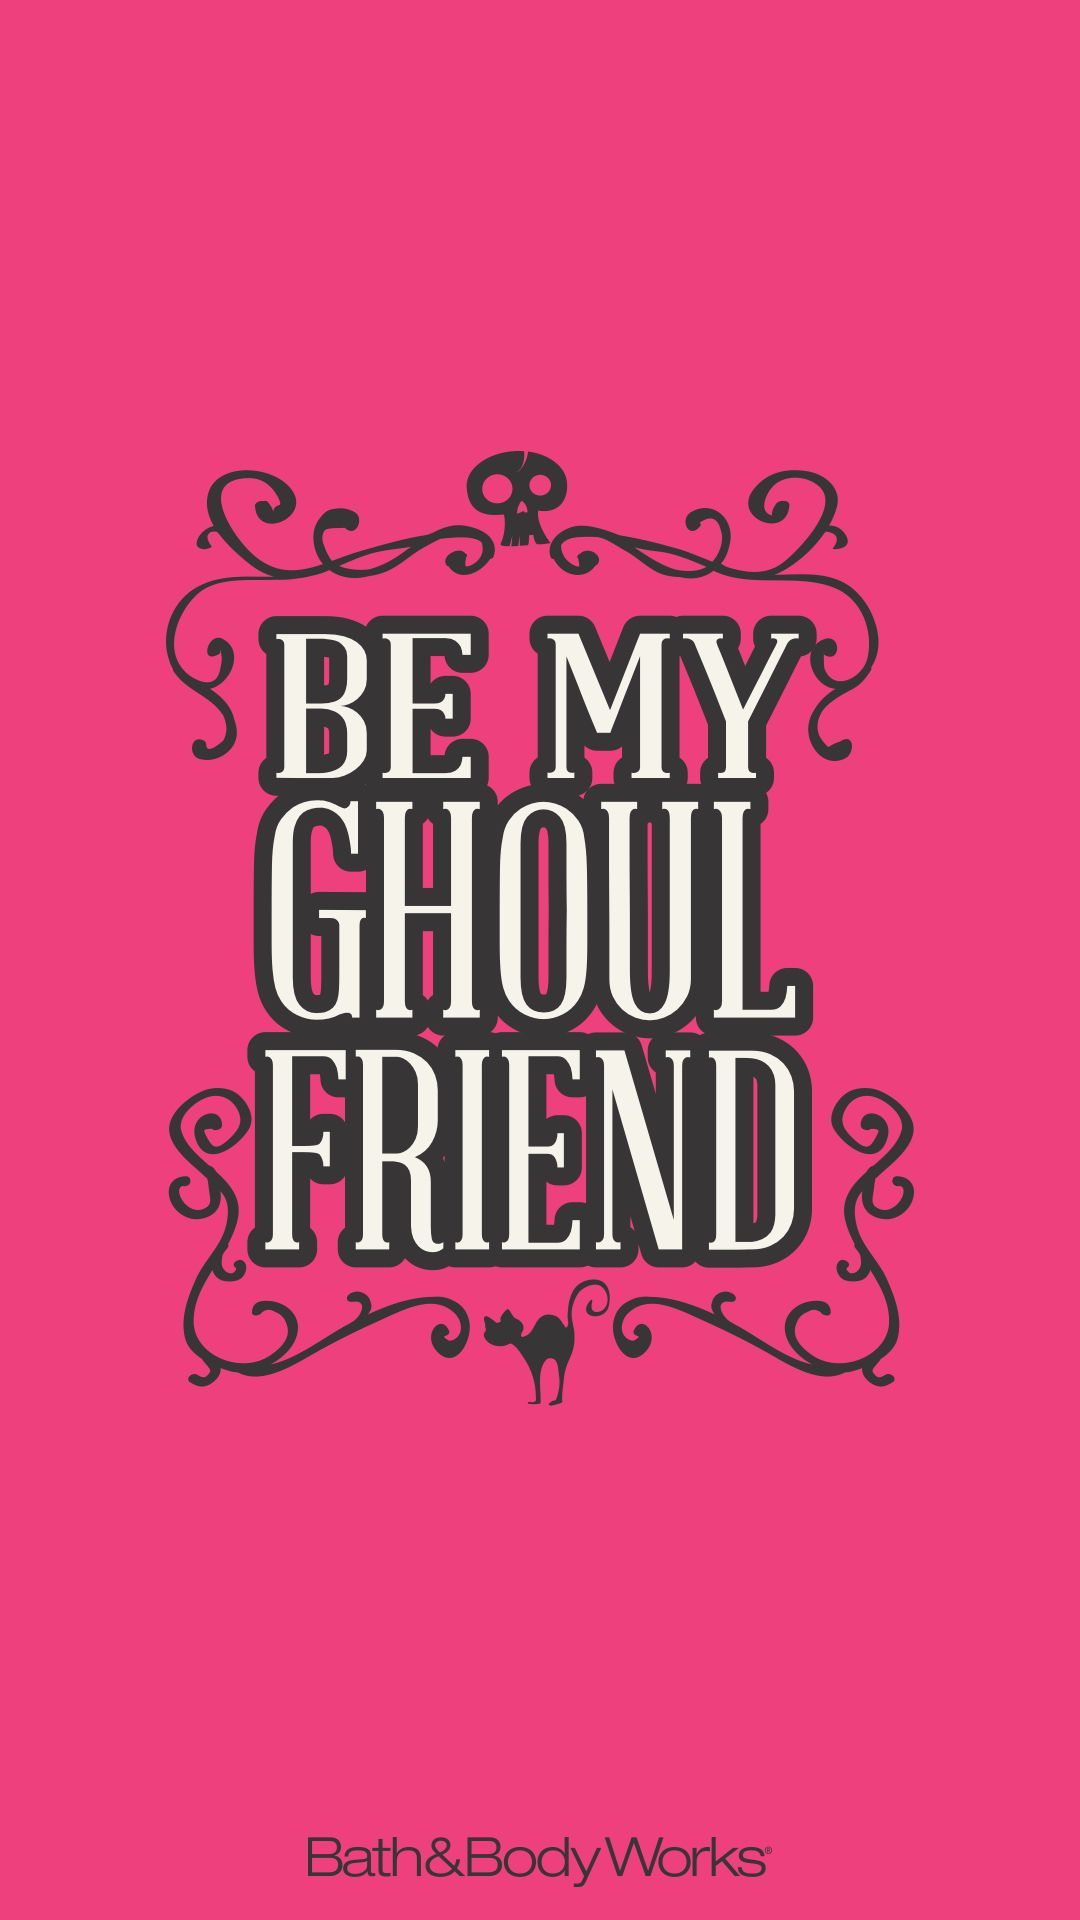 Be my ghoul friend iPhone Wallpaper. Halloween wallpaper, Words wallpaper, Smartphone wallpaper